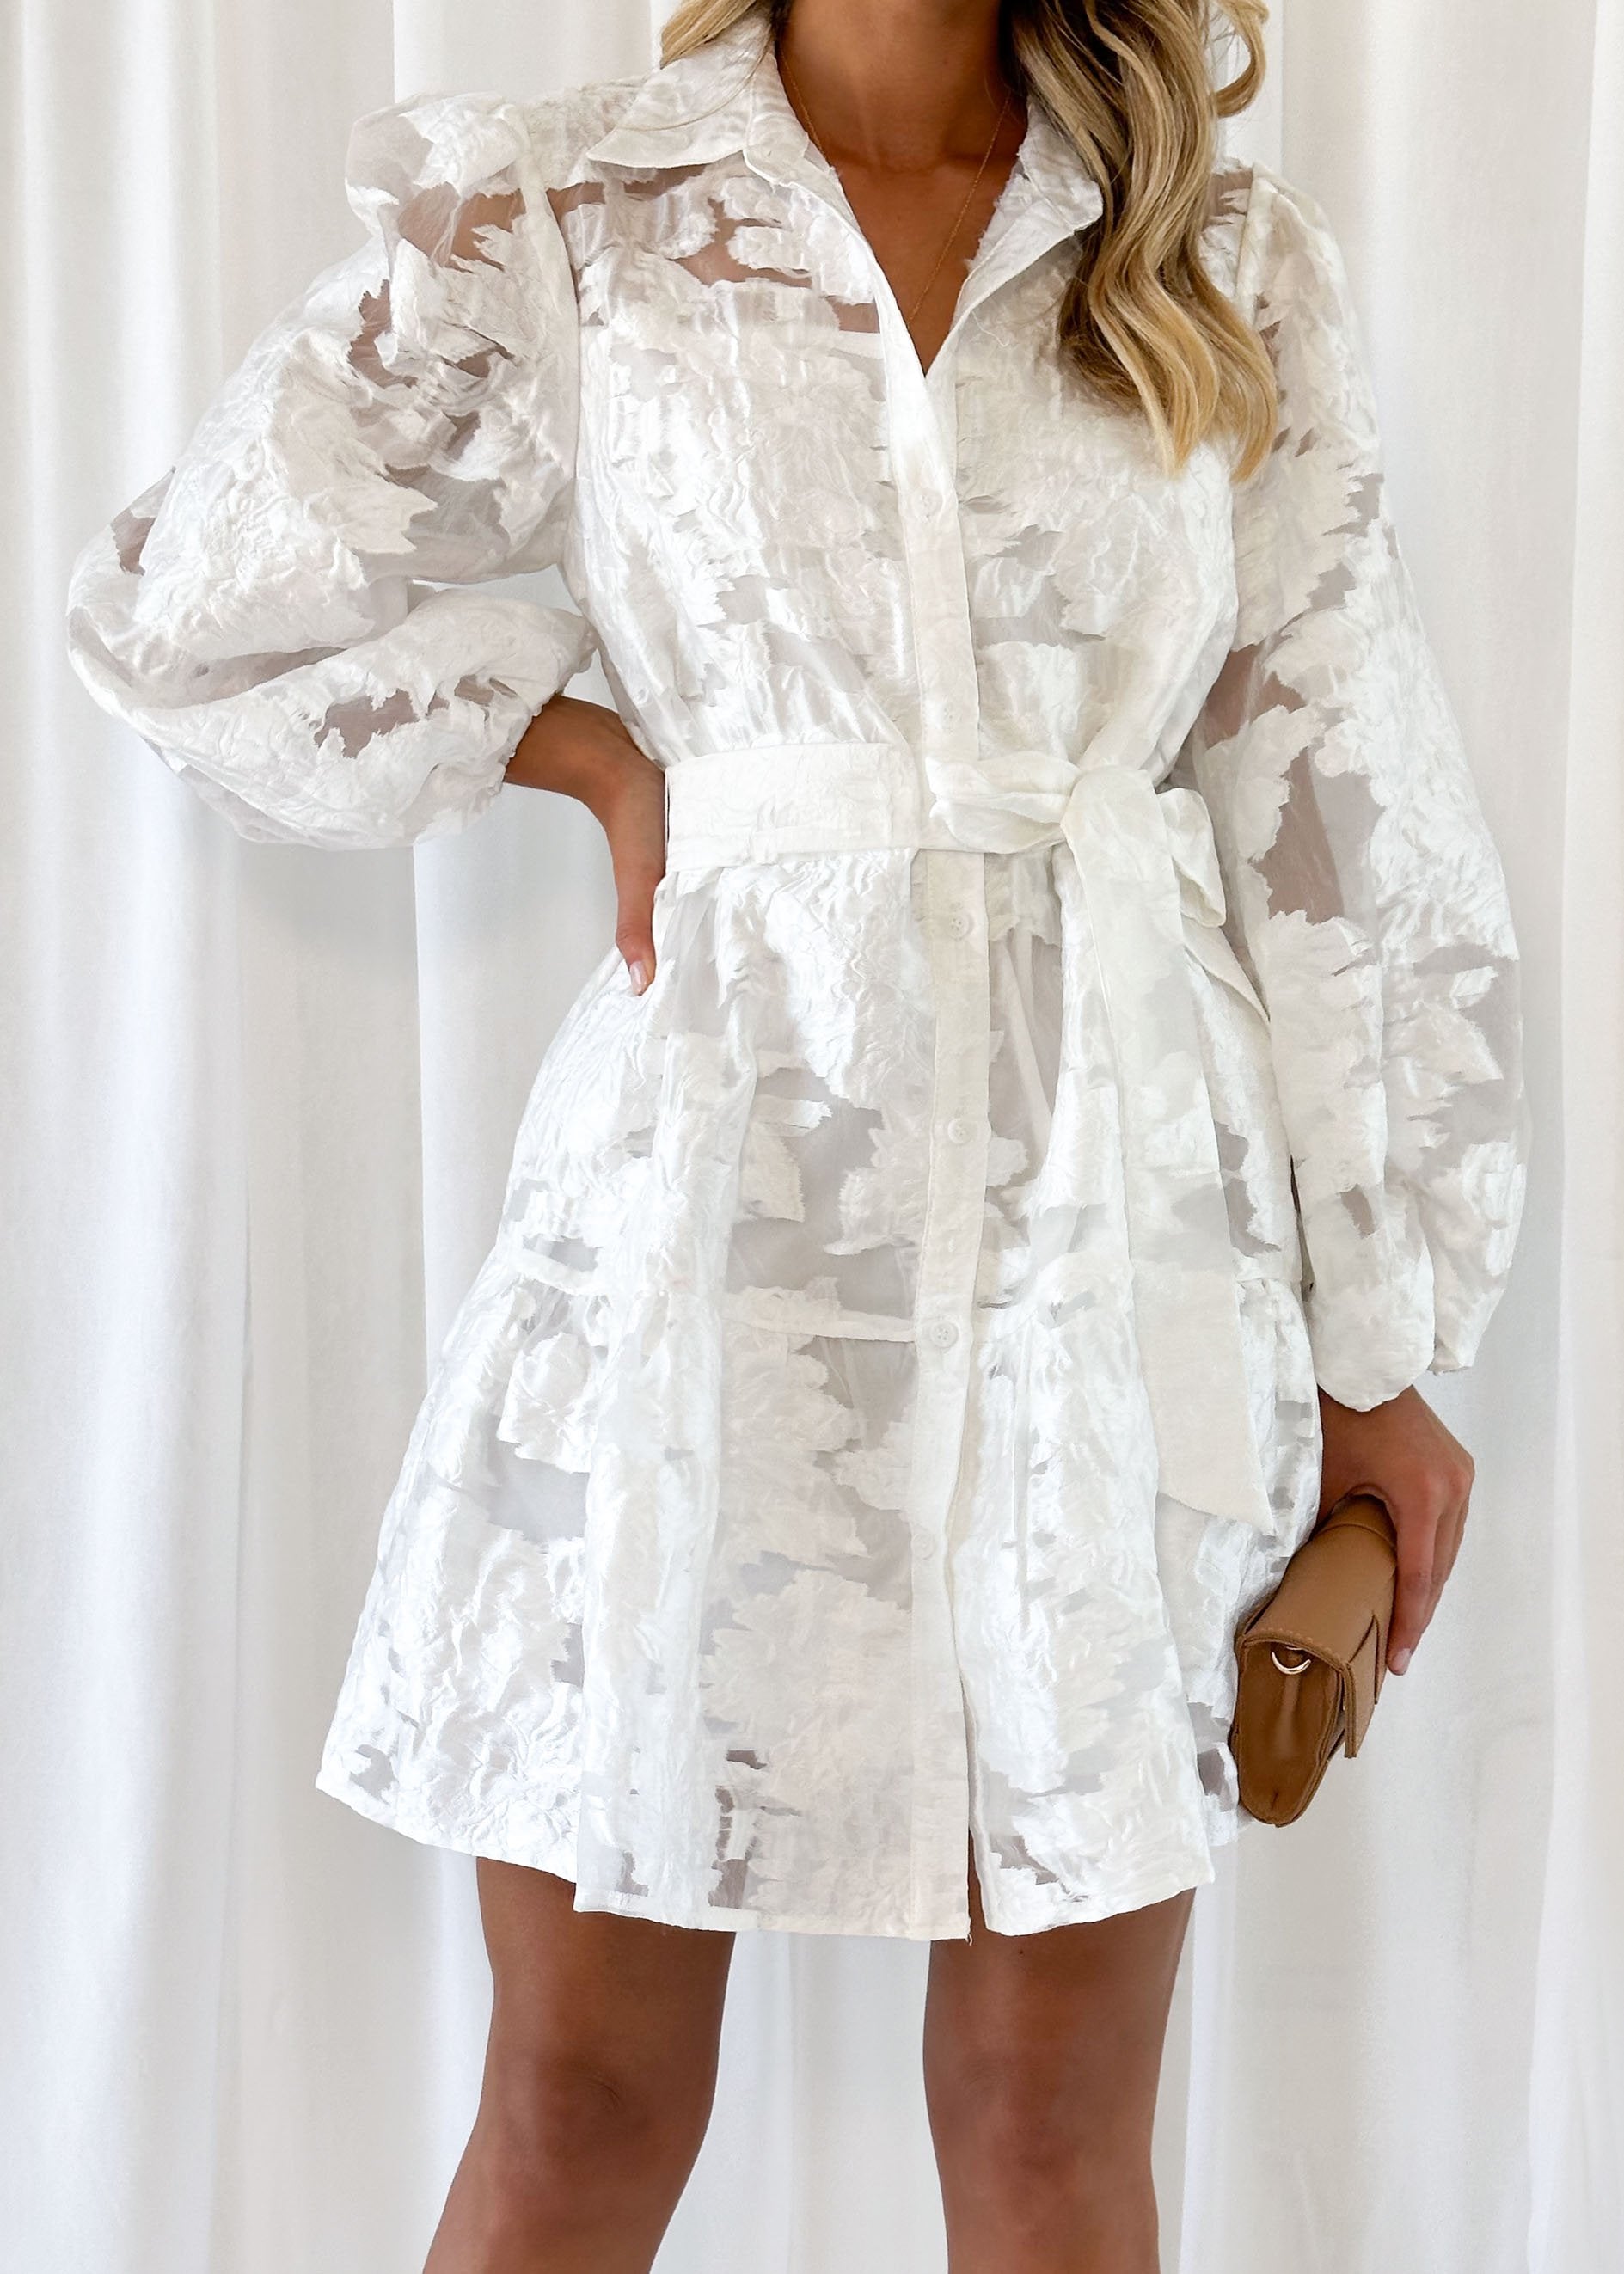 Coeve Dress - Off White